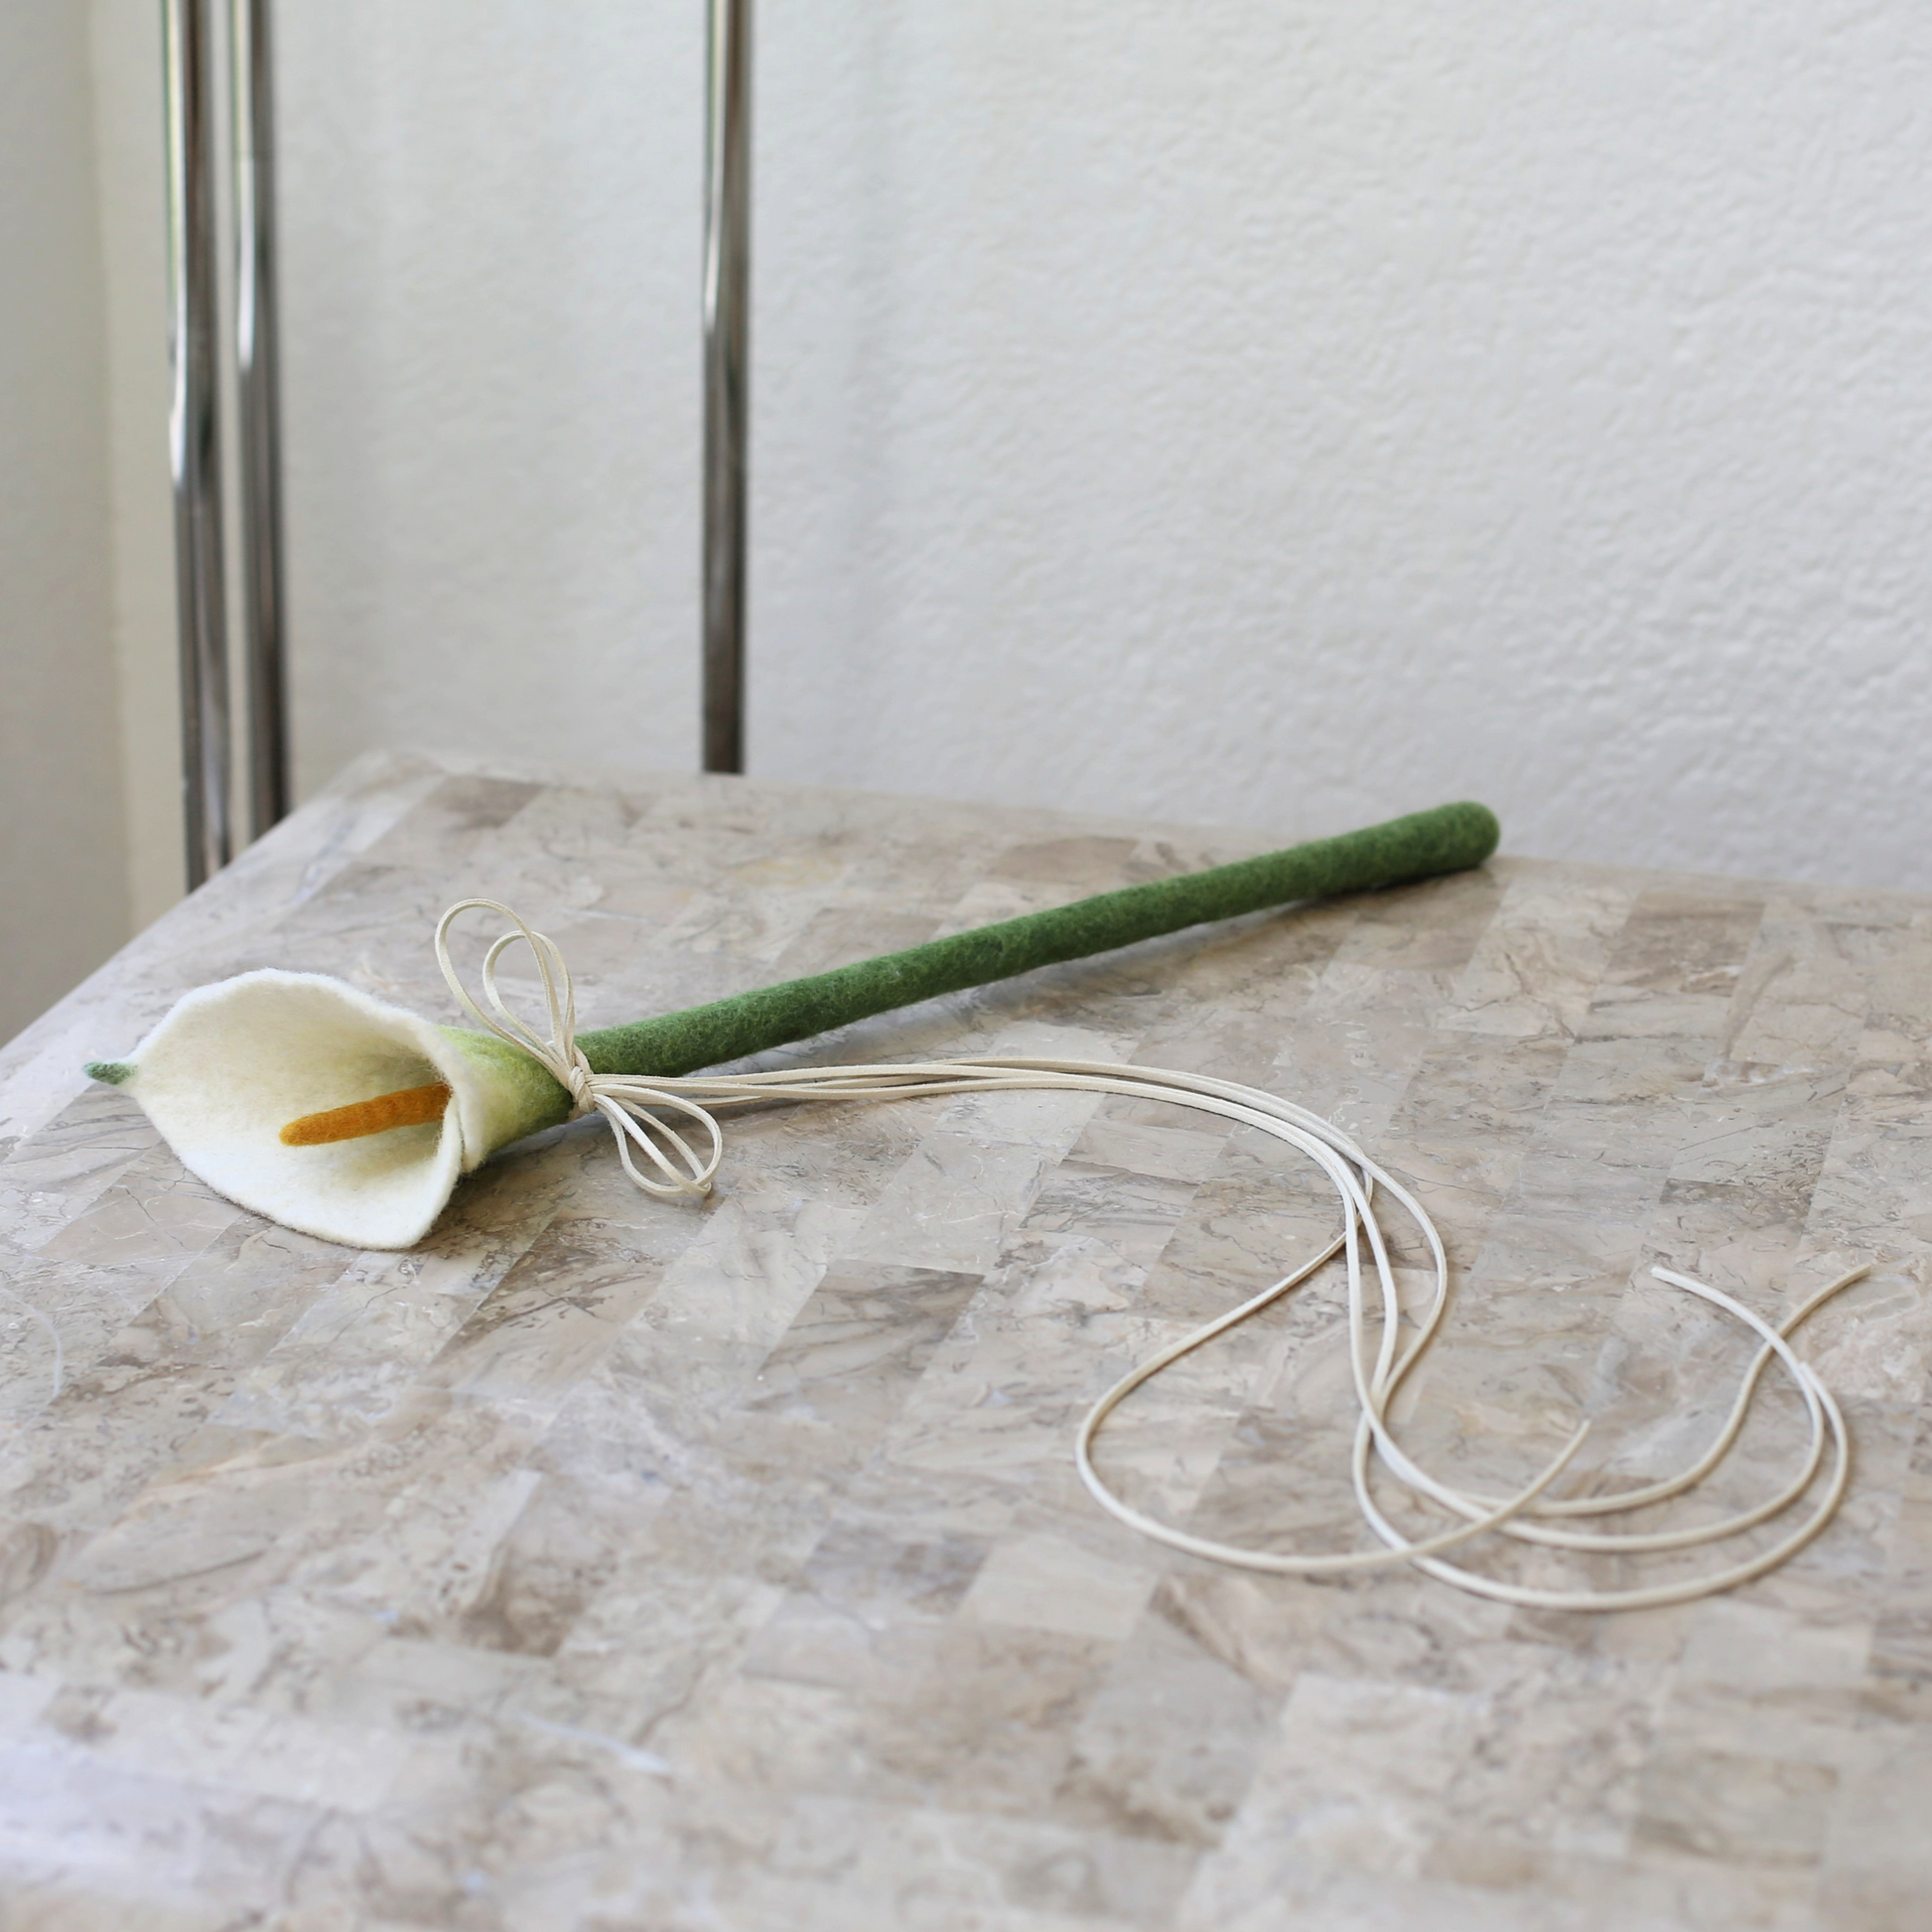 calla lily toy wand called flora by modern cat furniture company catenary on tessellated stone table 